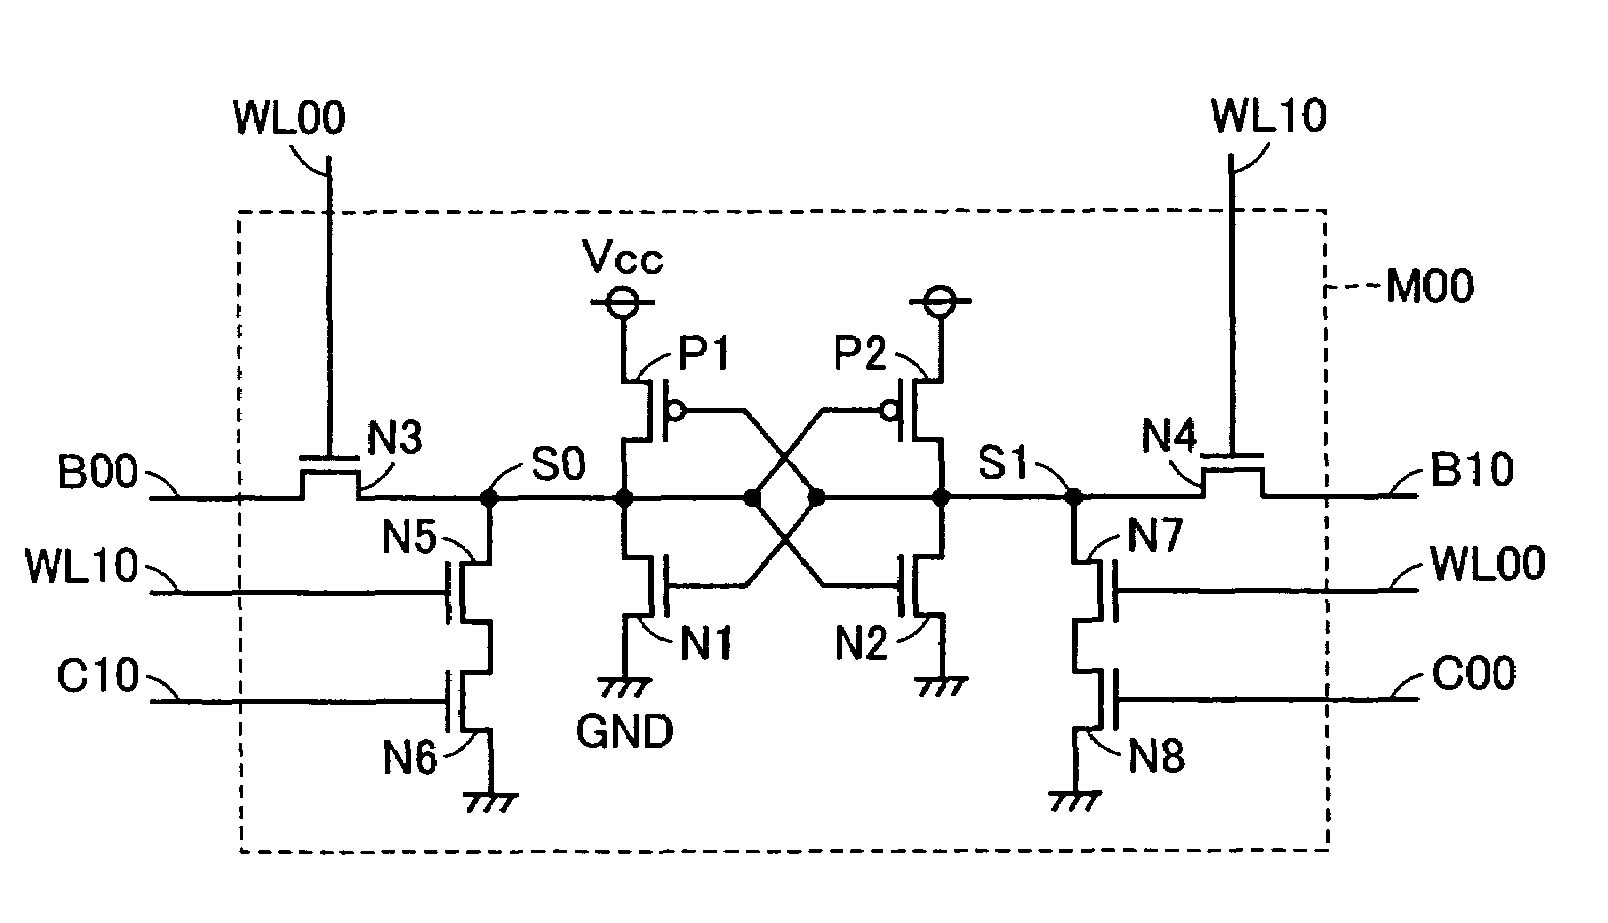 Multiport semiconductor memory device capable of sufficiently steadily holding data and providing a sufficient write margin